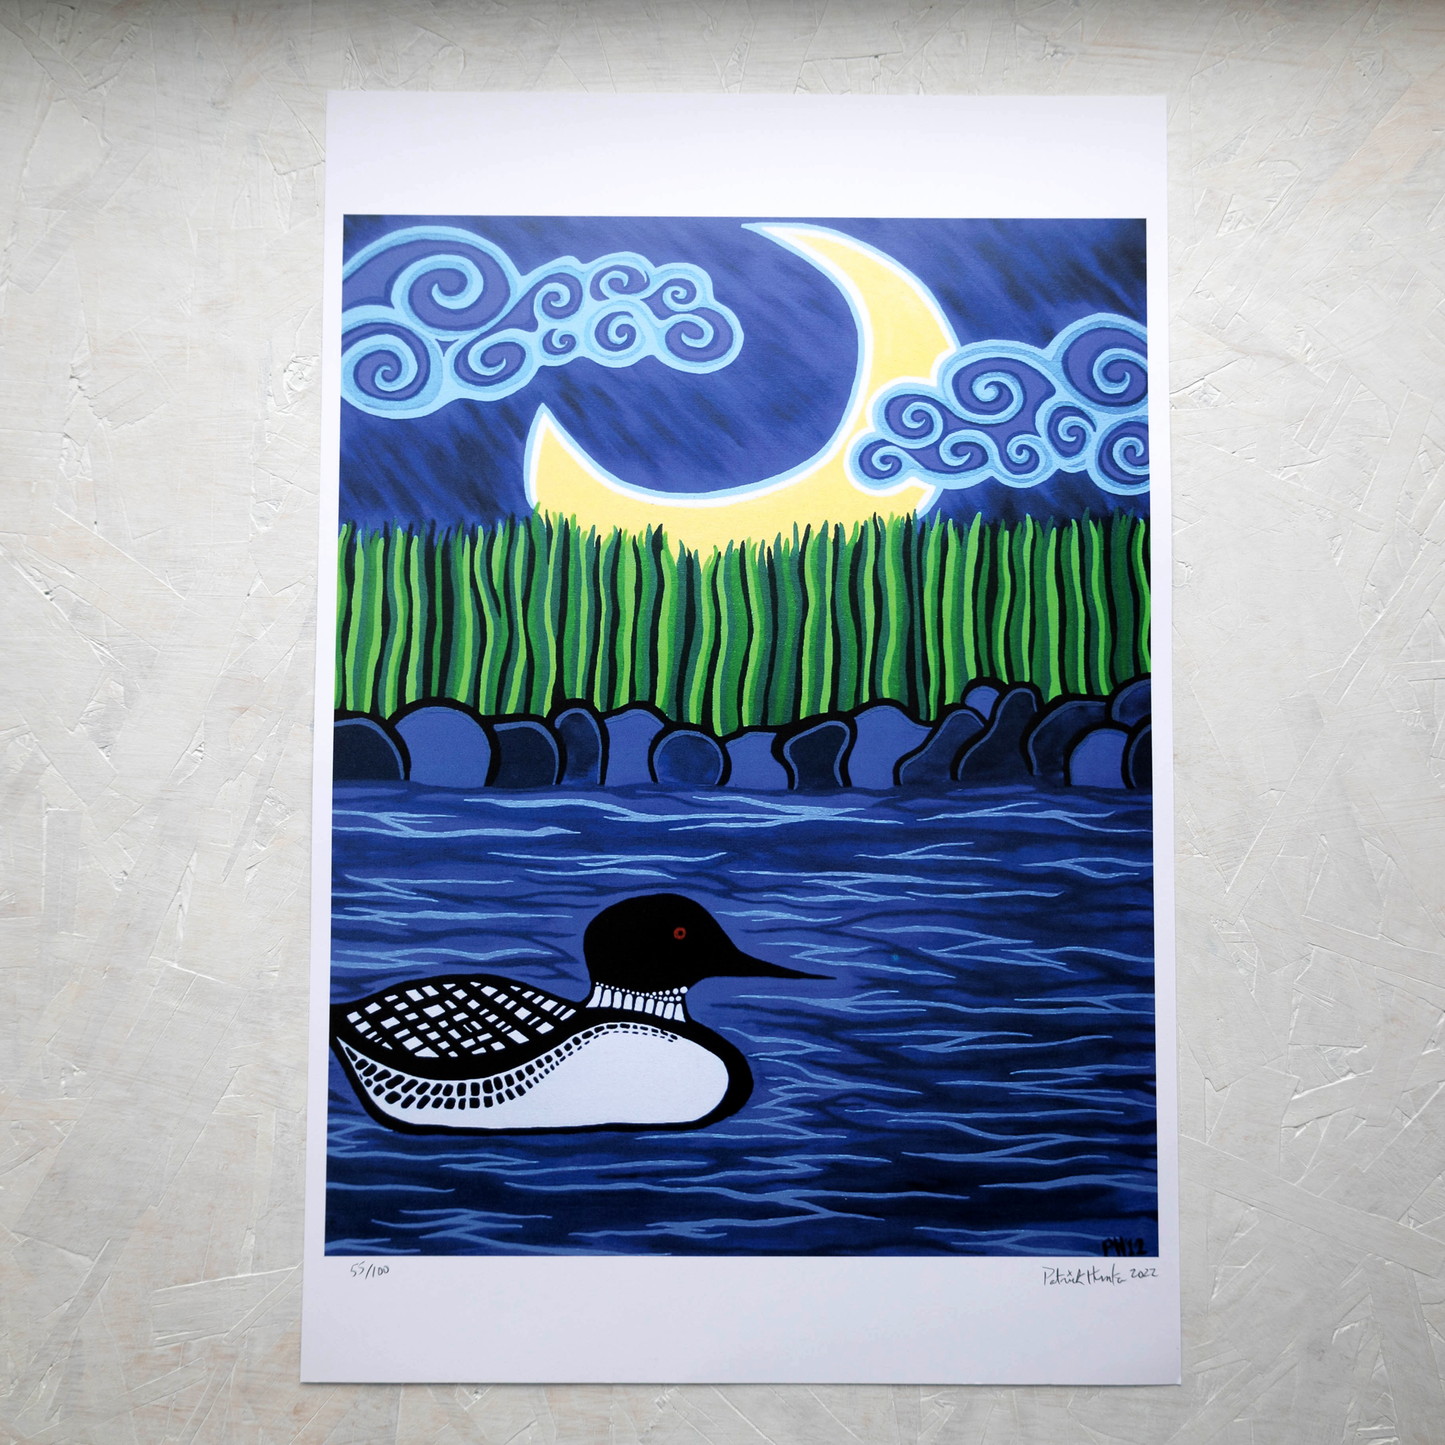 Print of Patrick Hunter's painting of a loon on a lake with crescent moon above, woodland art style.